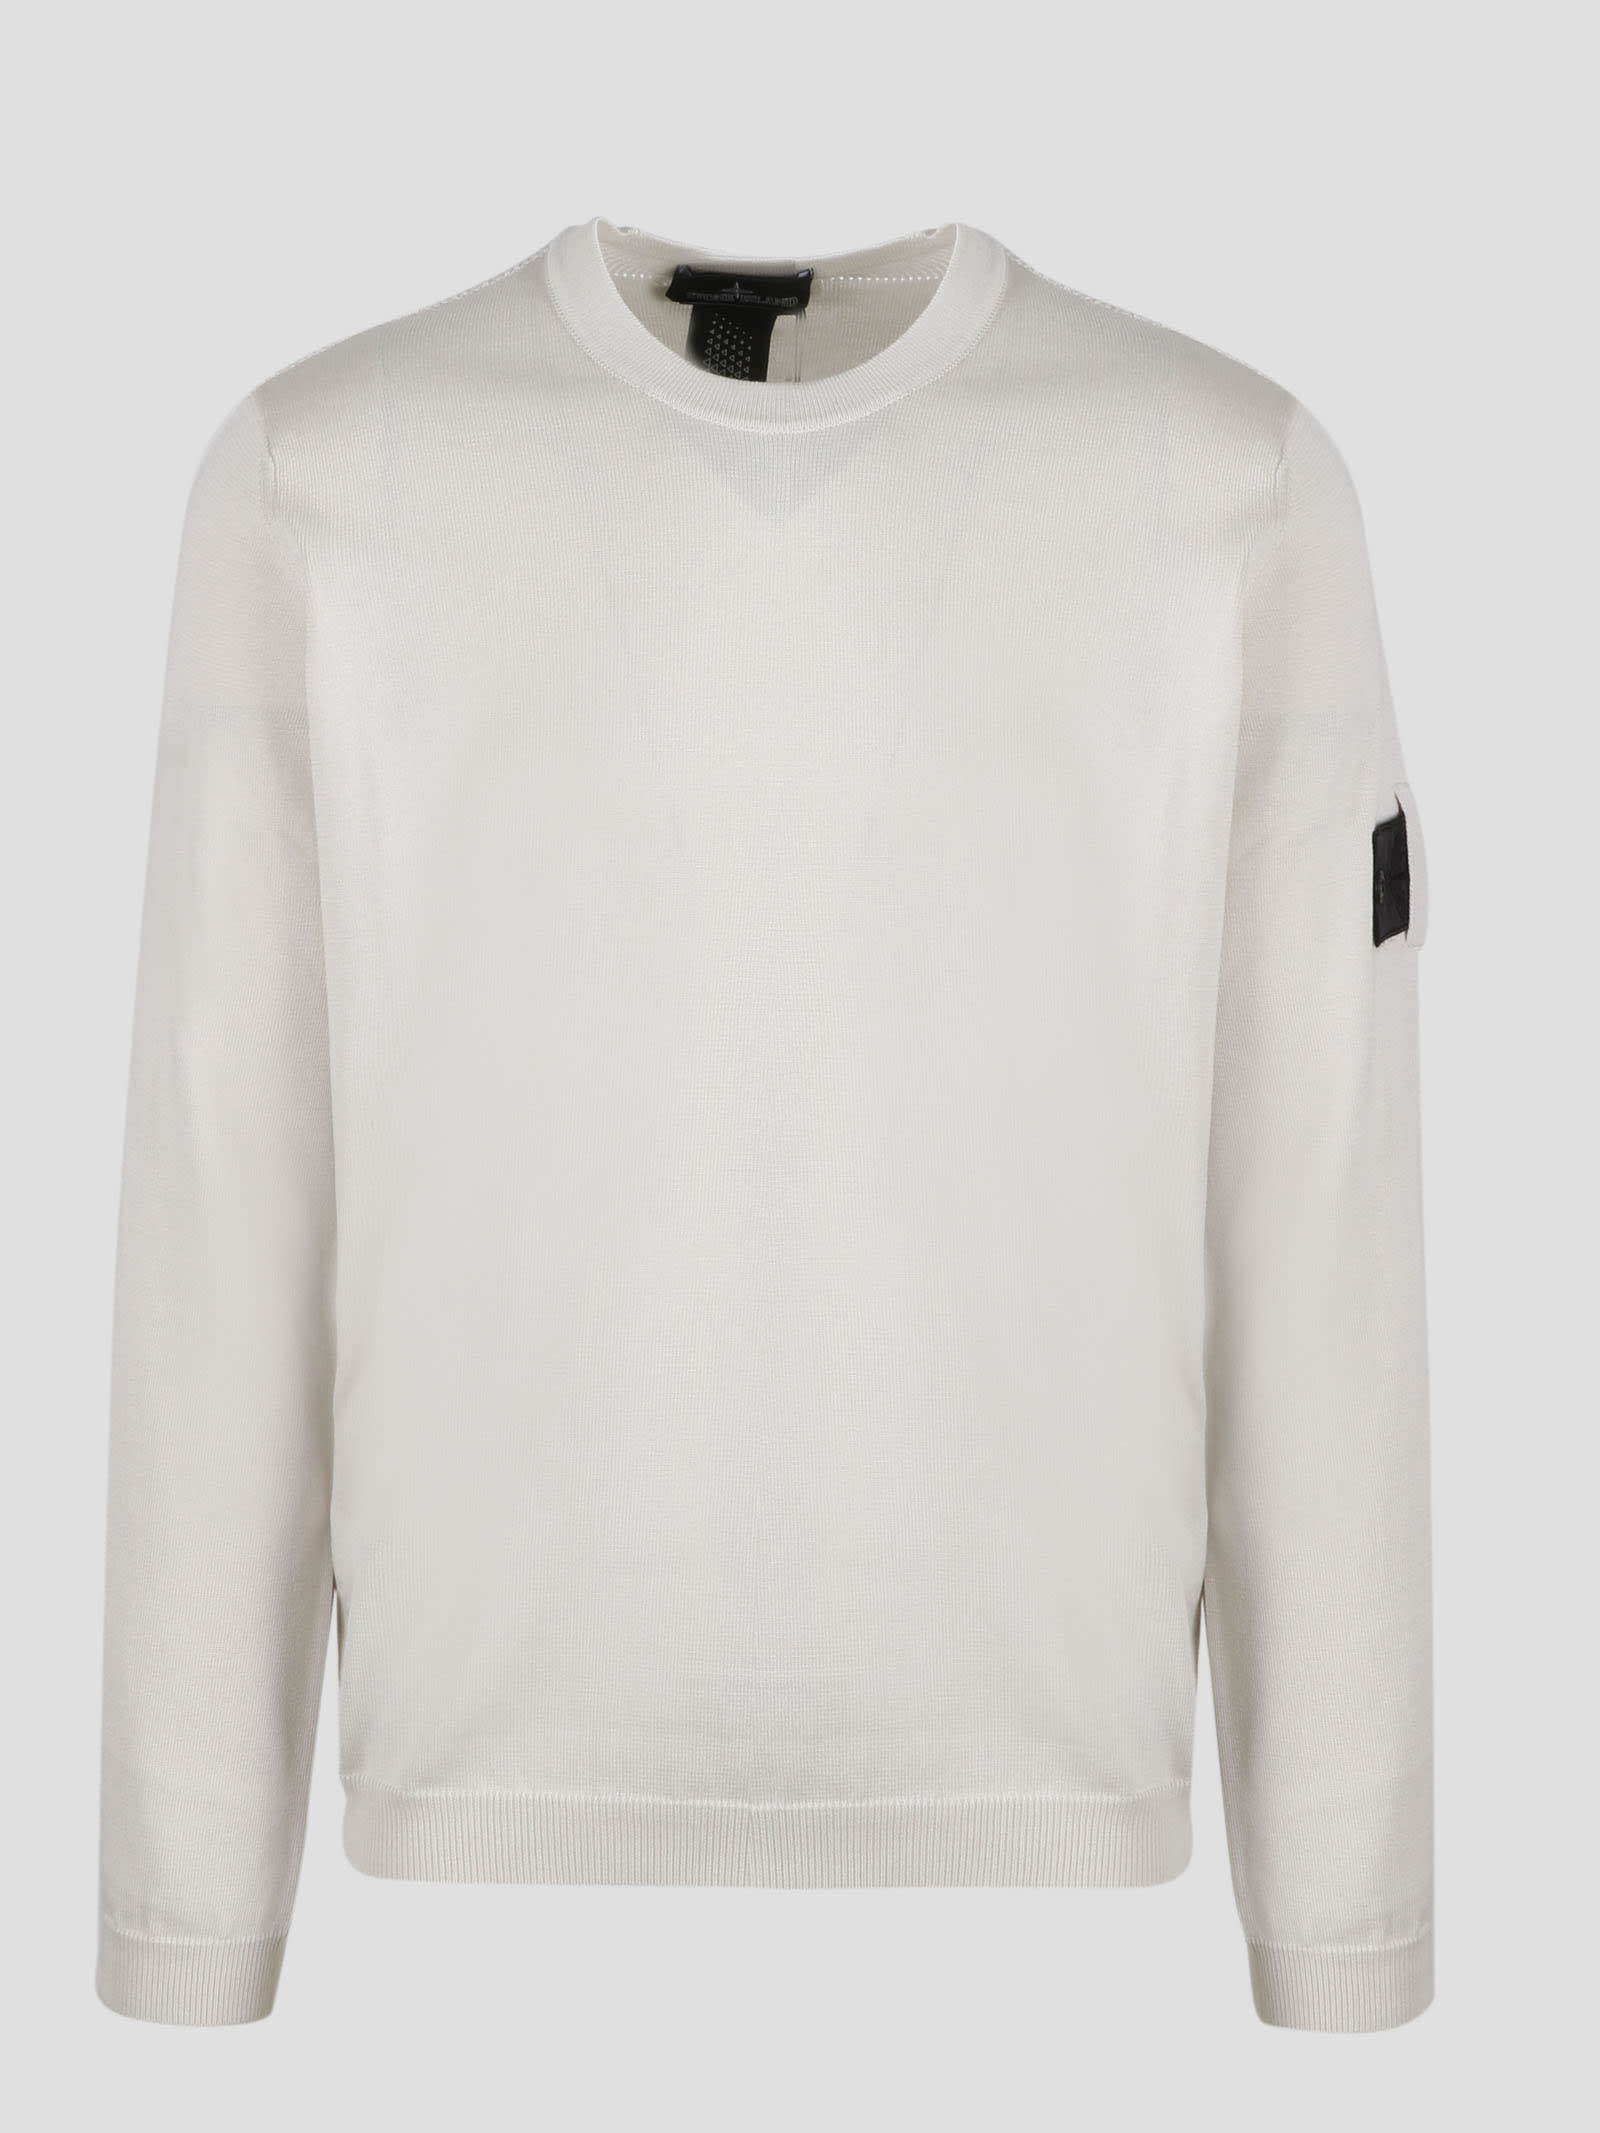 Stone Island Shadow Project Capitolo 2 Sweater